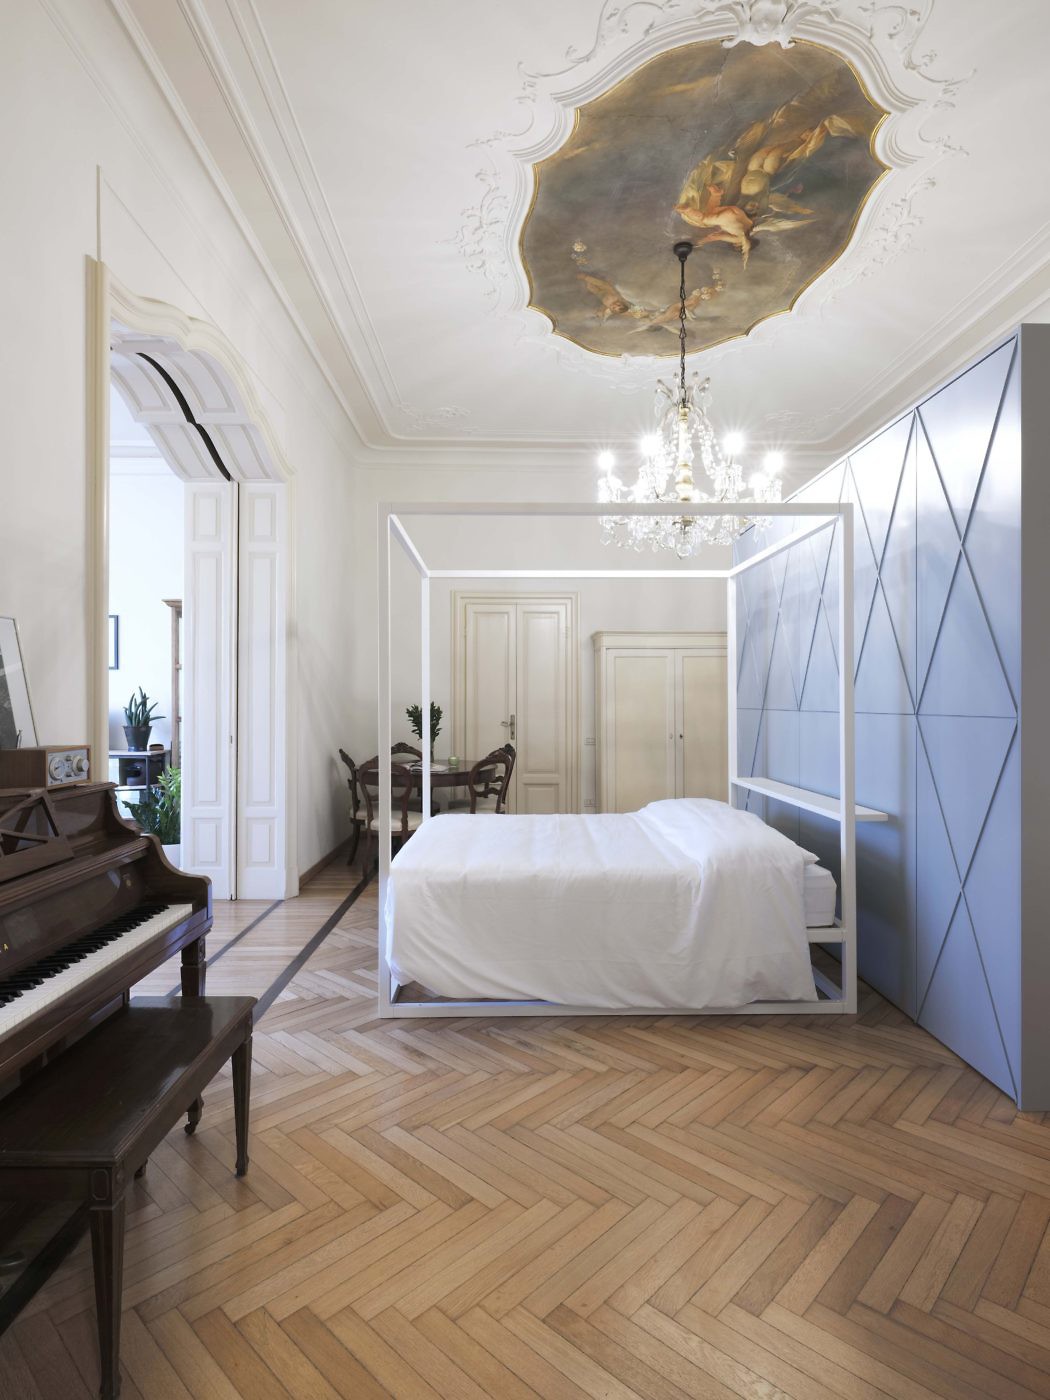 Elegant room with classic ceiling fresco and a juxtaposition of contemporary geometric closet